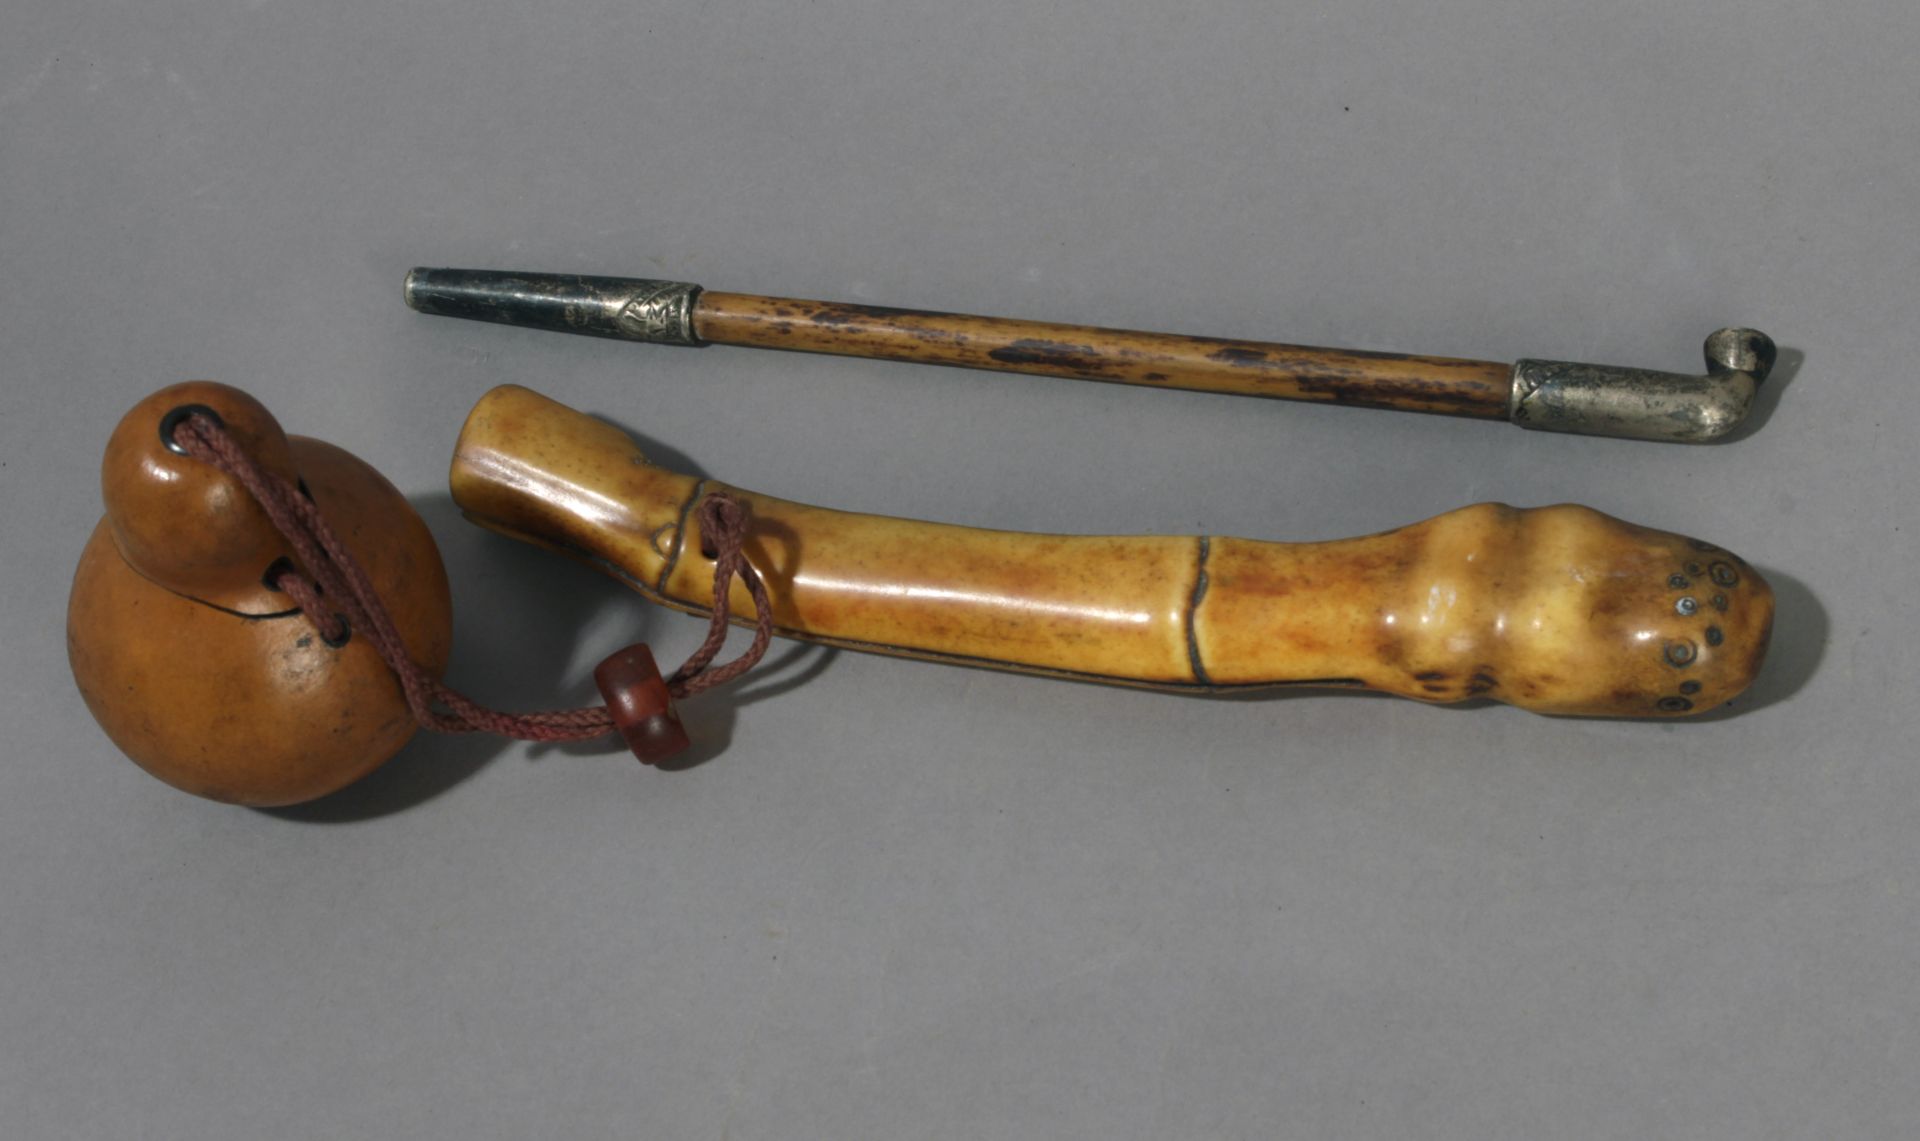 A kiseru or Japanese pipe from Meiji period (1868-1912). In carved bamboo and metal